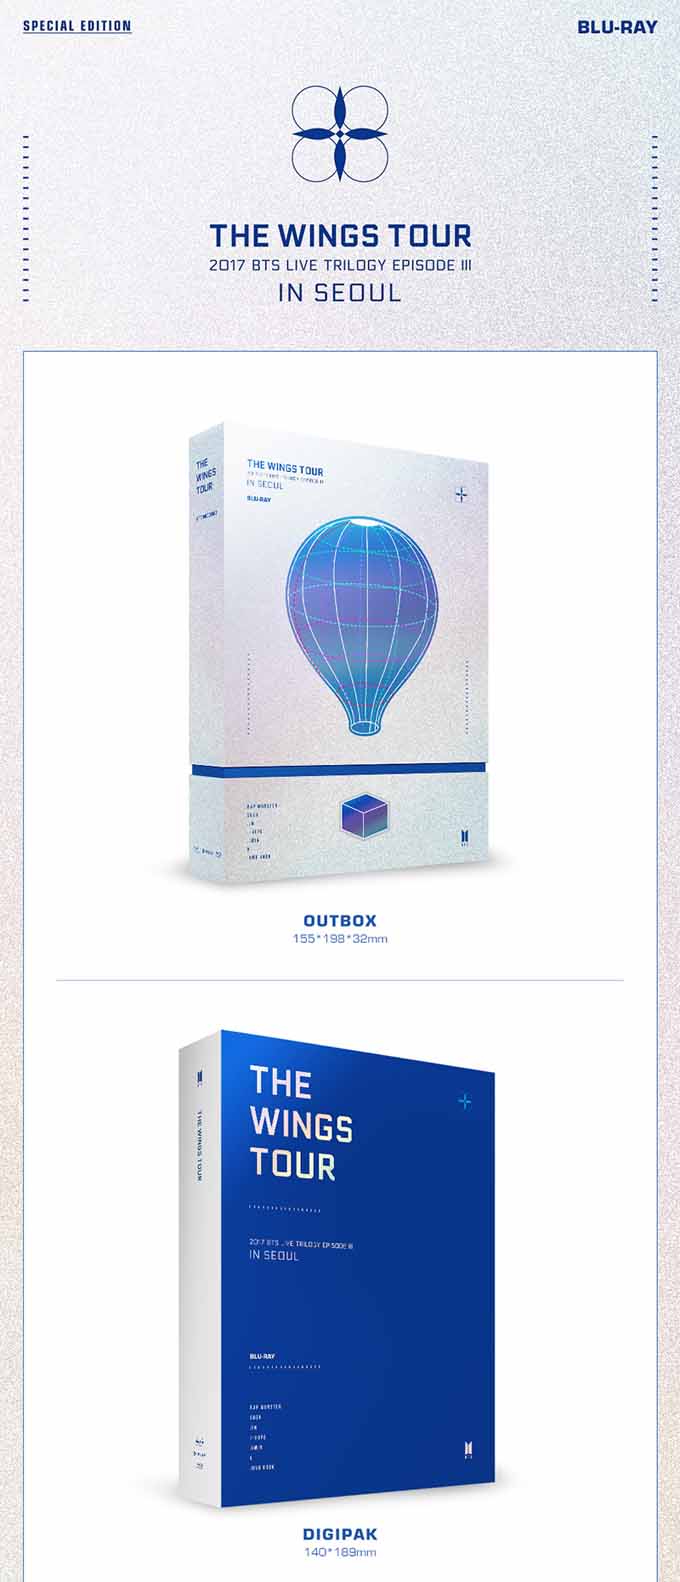 BTS THE WINGS TOUR 2017 in SEOUL Blu-rayTheWingsTour - www